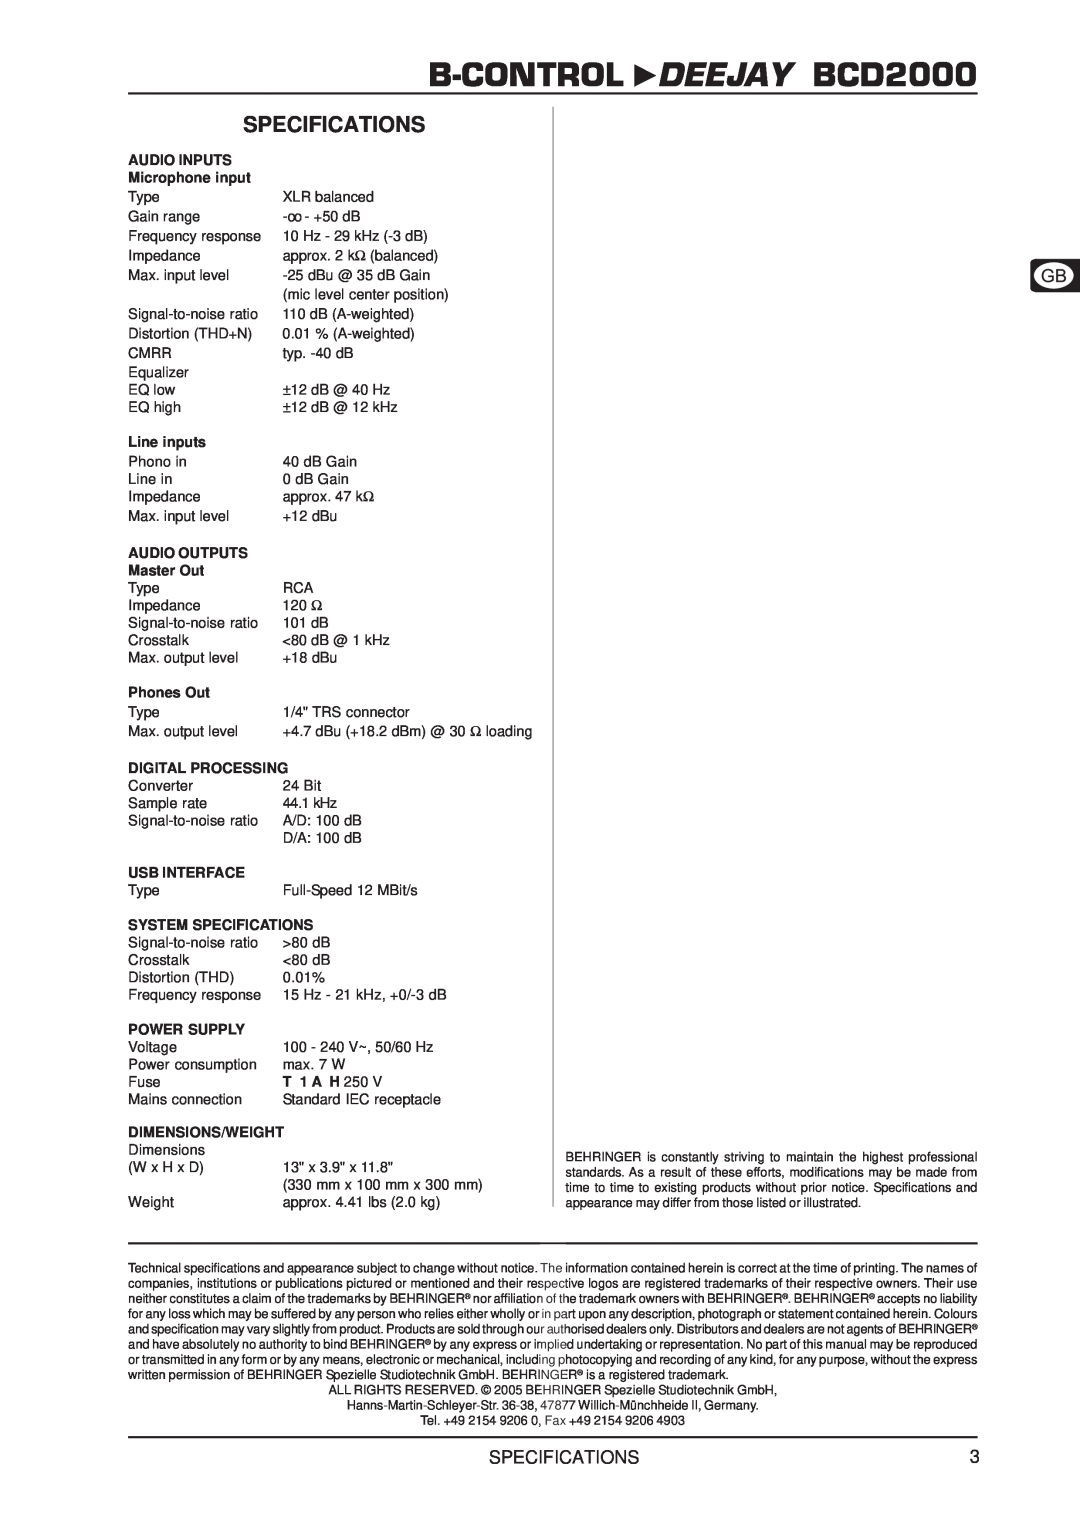 Behringer technical specifications Specifications, B-CONTROL DEEJAY BCD2000 